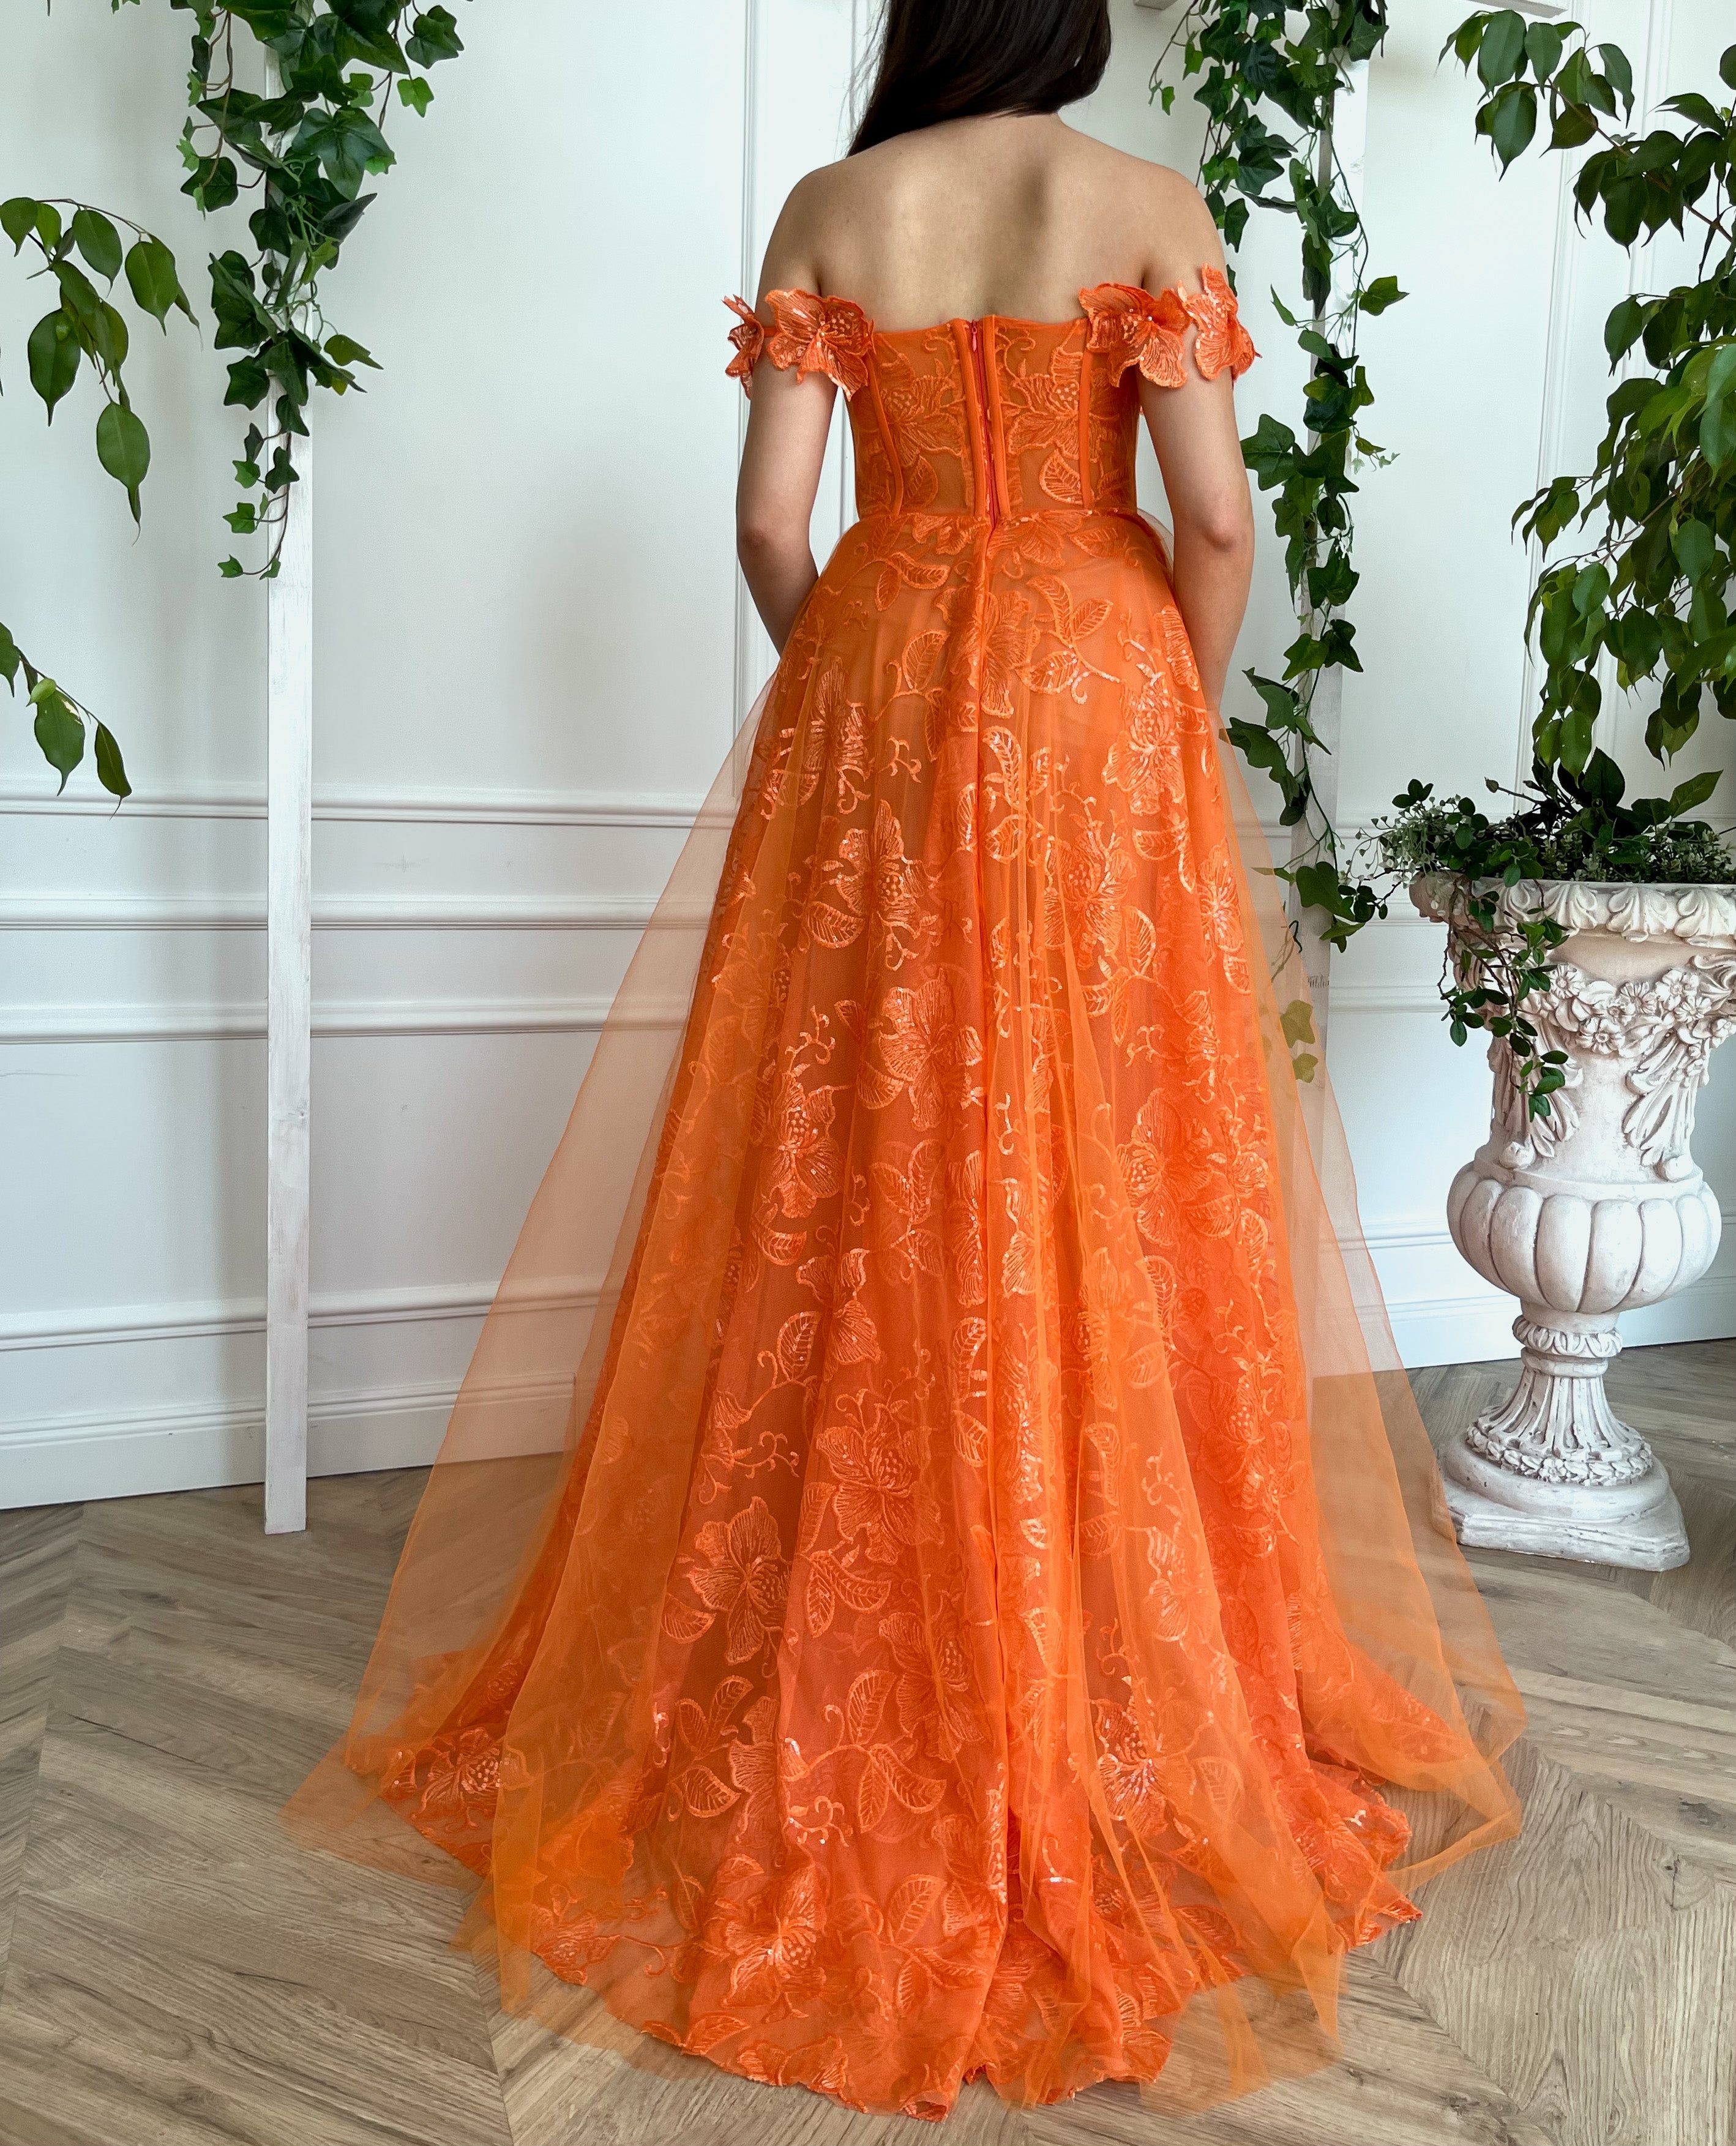 Luxury Orange Mermaid Orange Mermaid Prom Dresses With Crystal  Embellishments And Floral Accents Extra Rhinestone Tight Gown For Black  Girls Formal Evening Glamour And Birthday Parties Vestidos De Fiesta 2023  From Bridalstore,